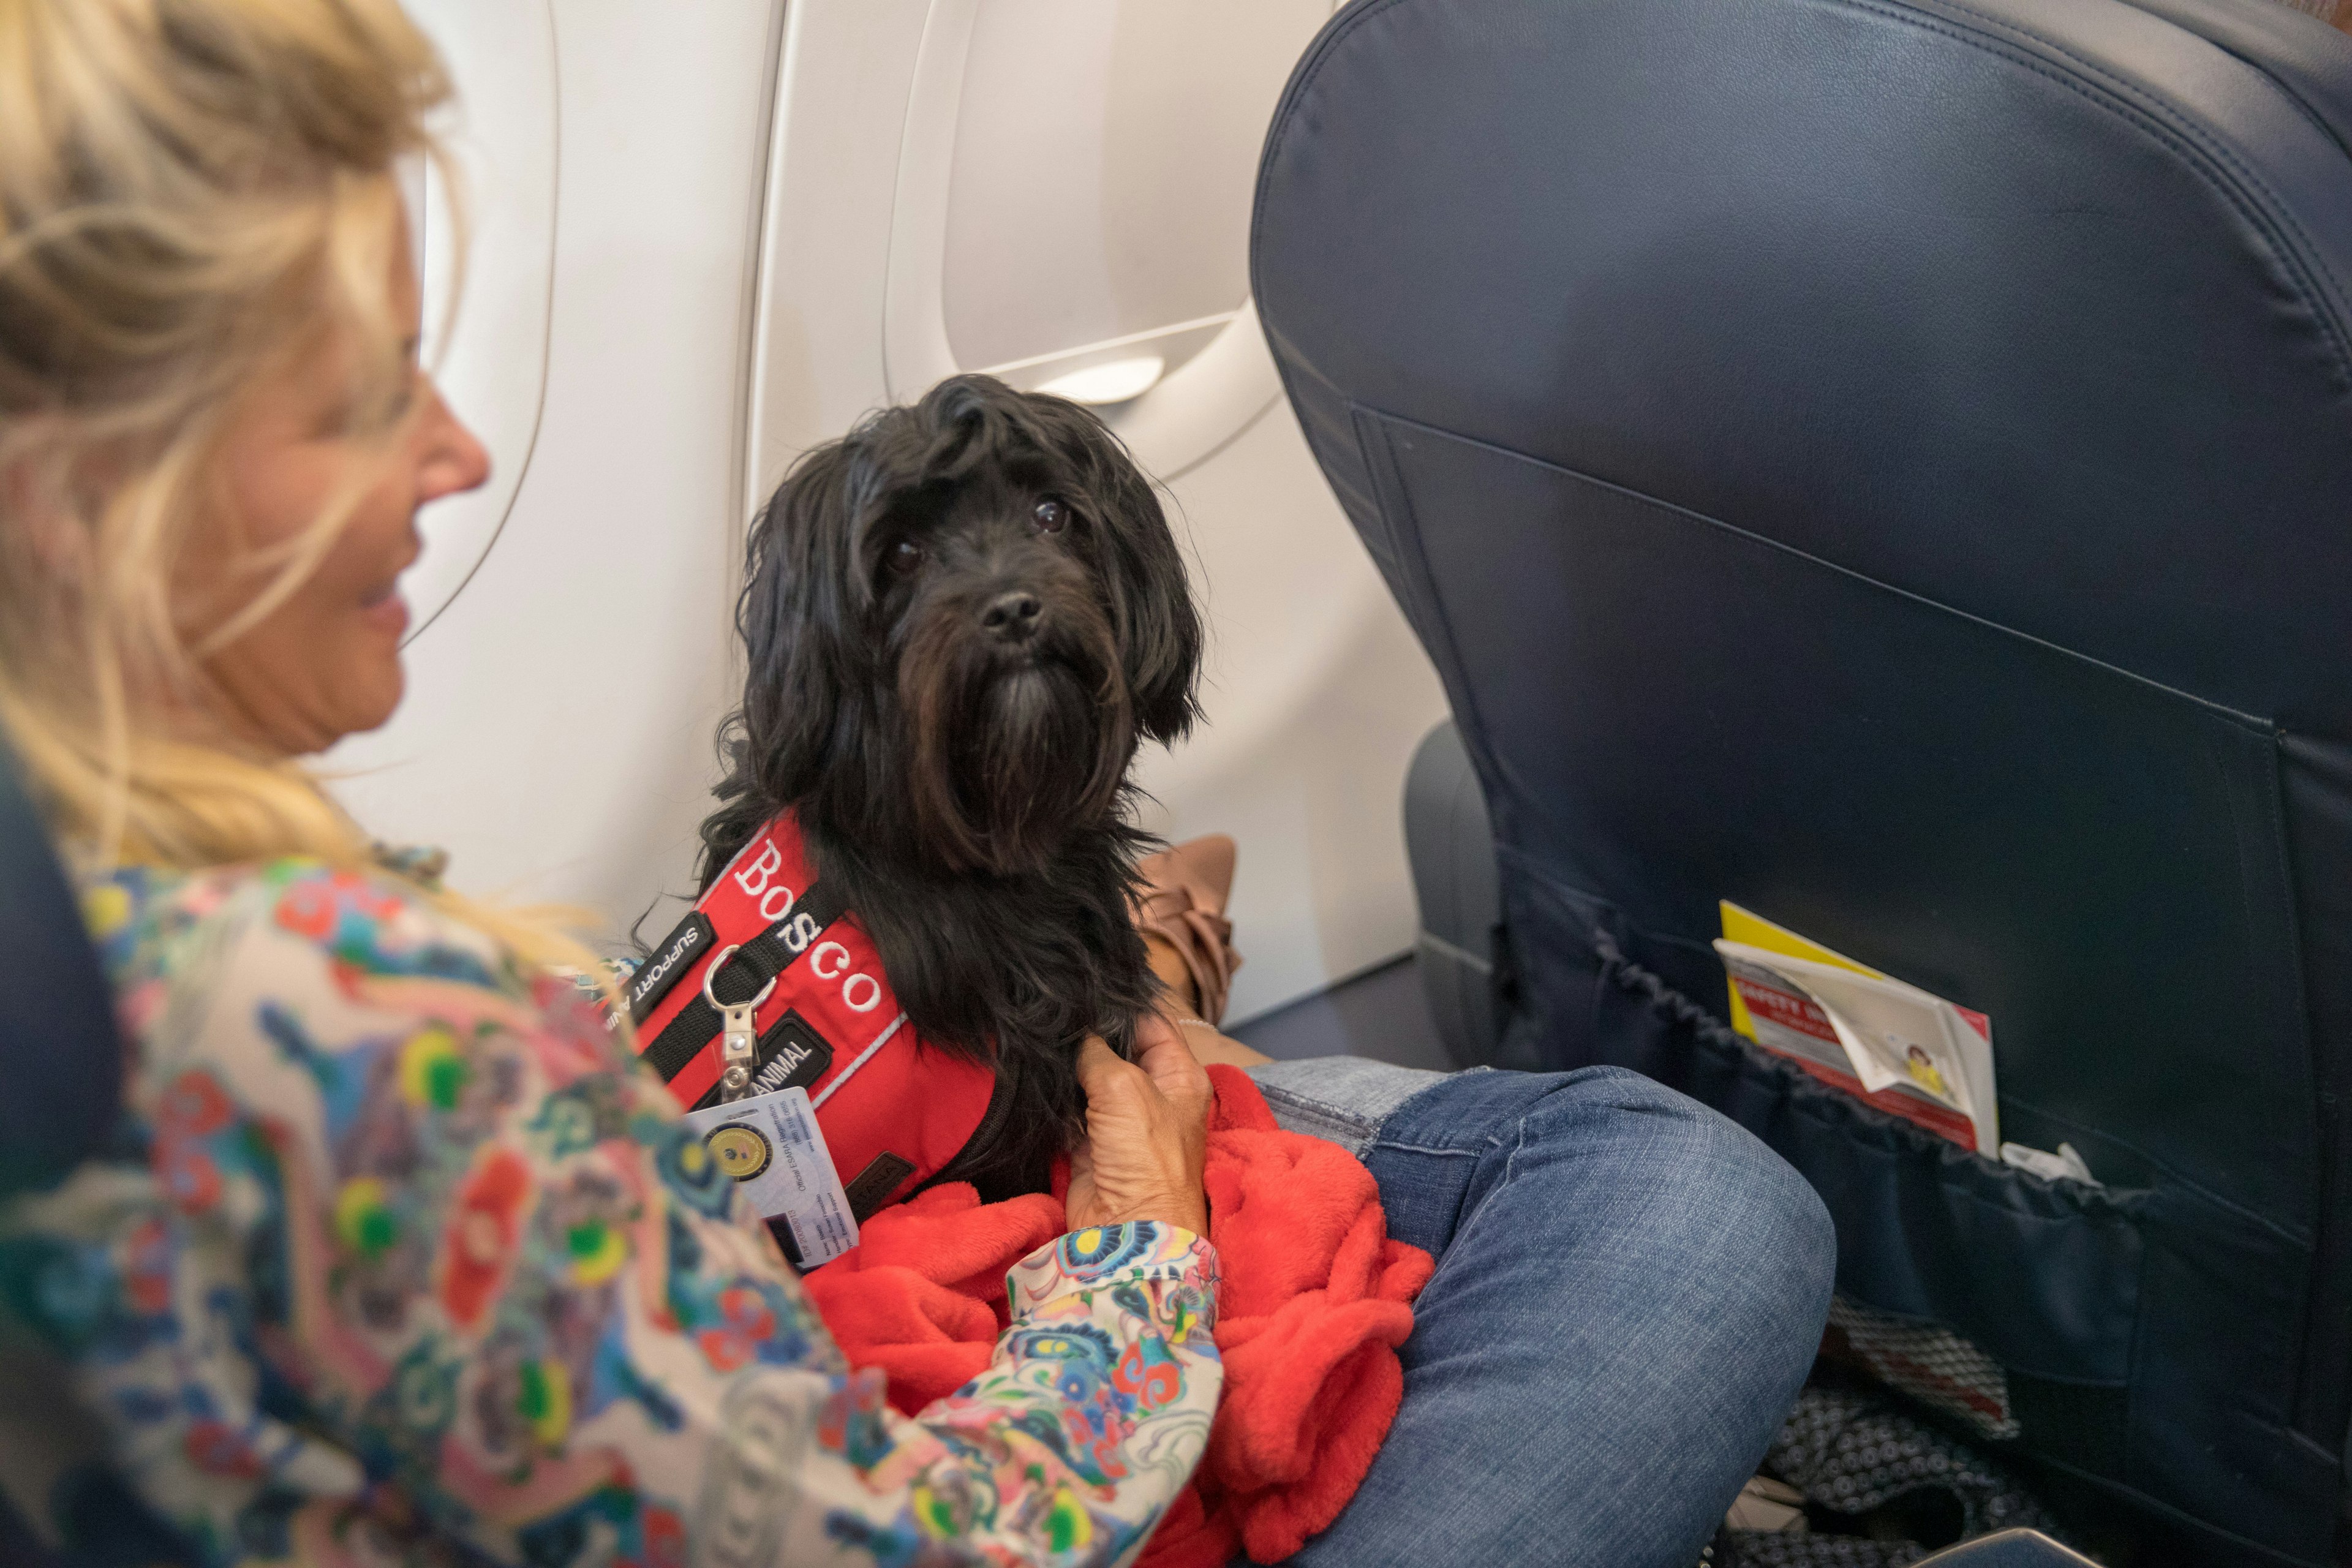 July 12, 2018: A woman holding a support dog on her lap while on an airplane.